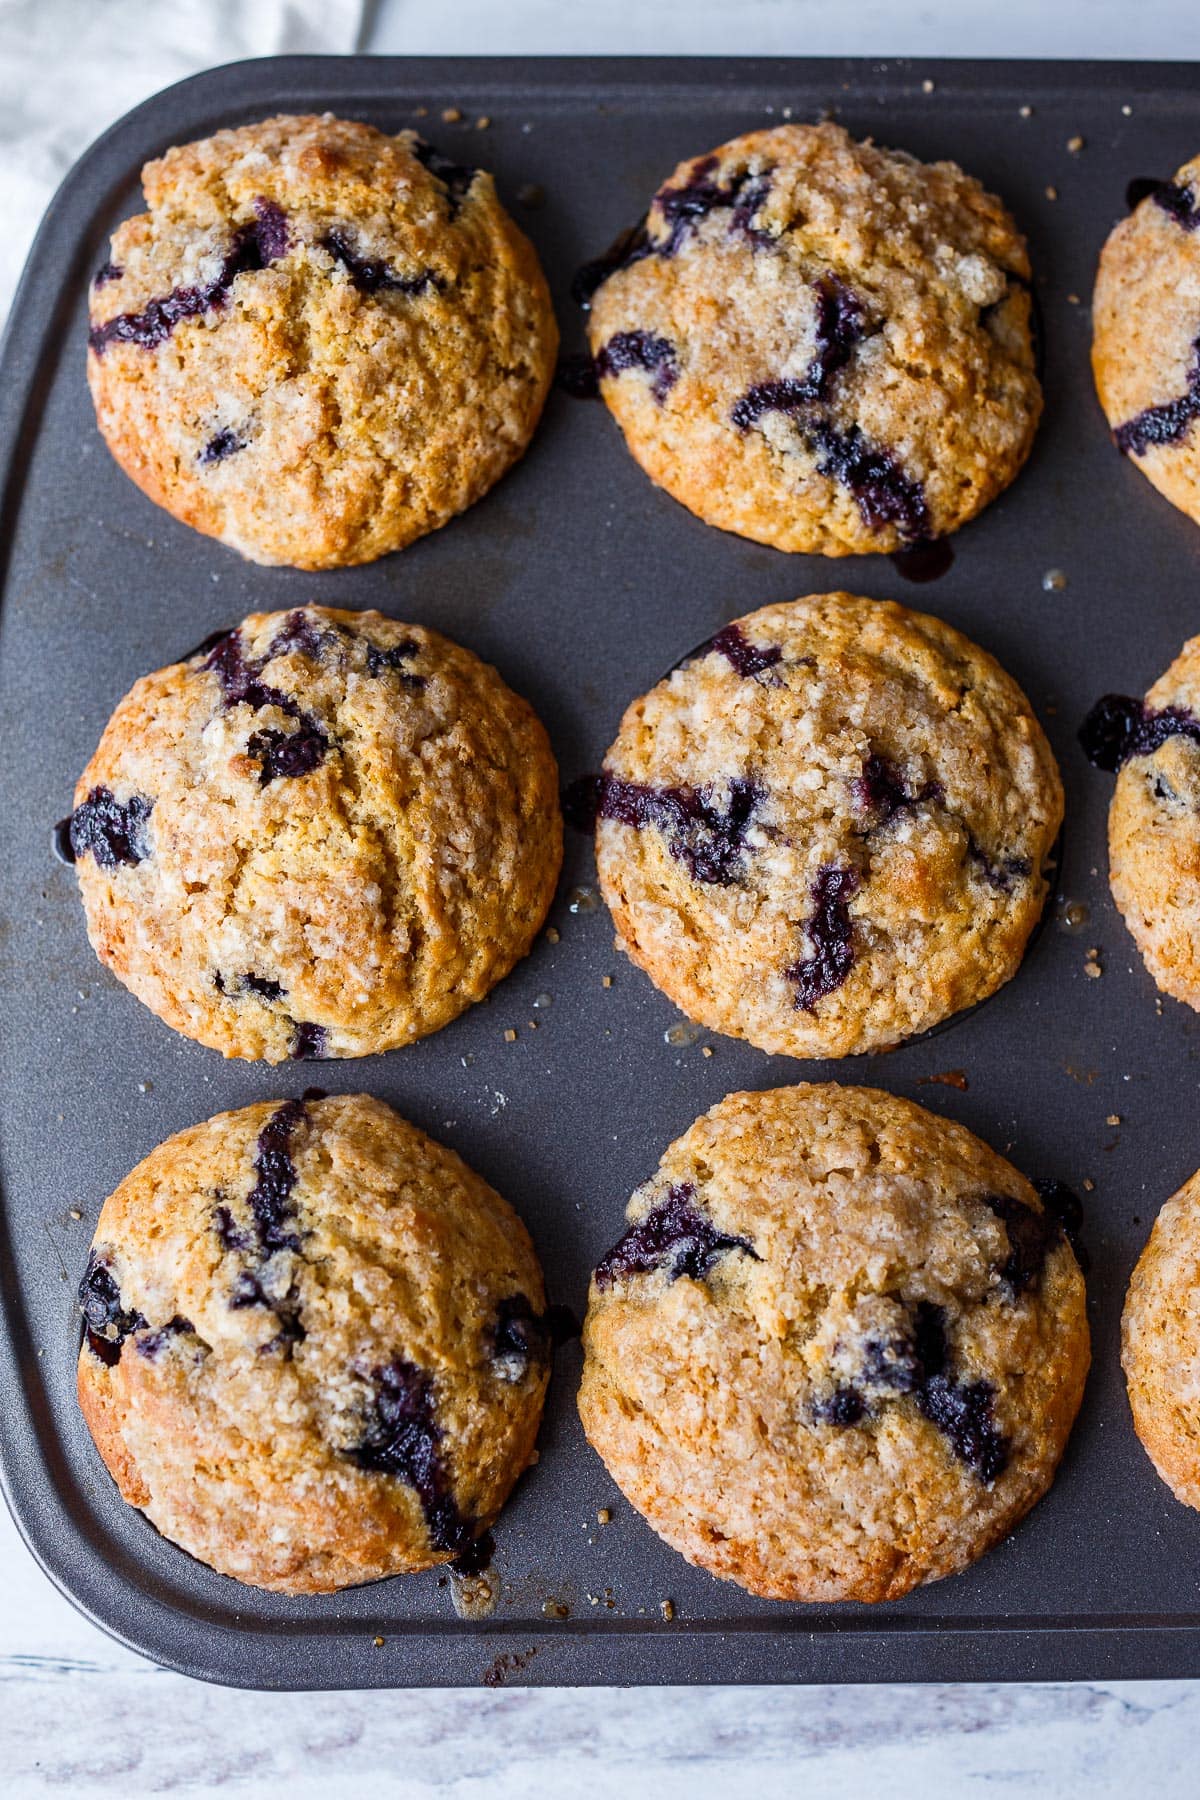 Tender blueberry muffins lightly sweetened with lemon zest and cardamom, made with fresh or frozen blueberries.  A delicious breakfast or an afternoon snack.  Gluten free customizable.